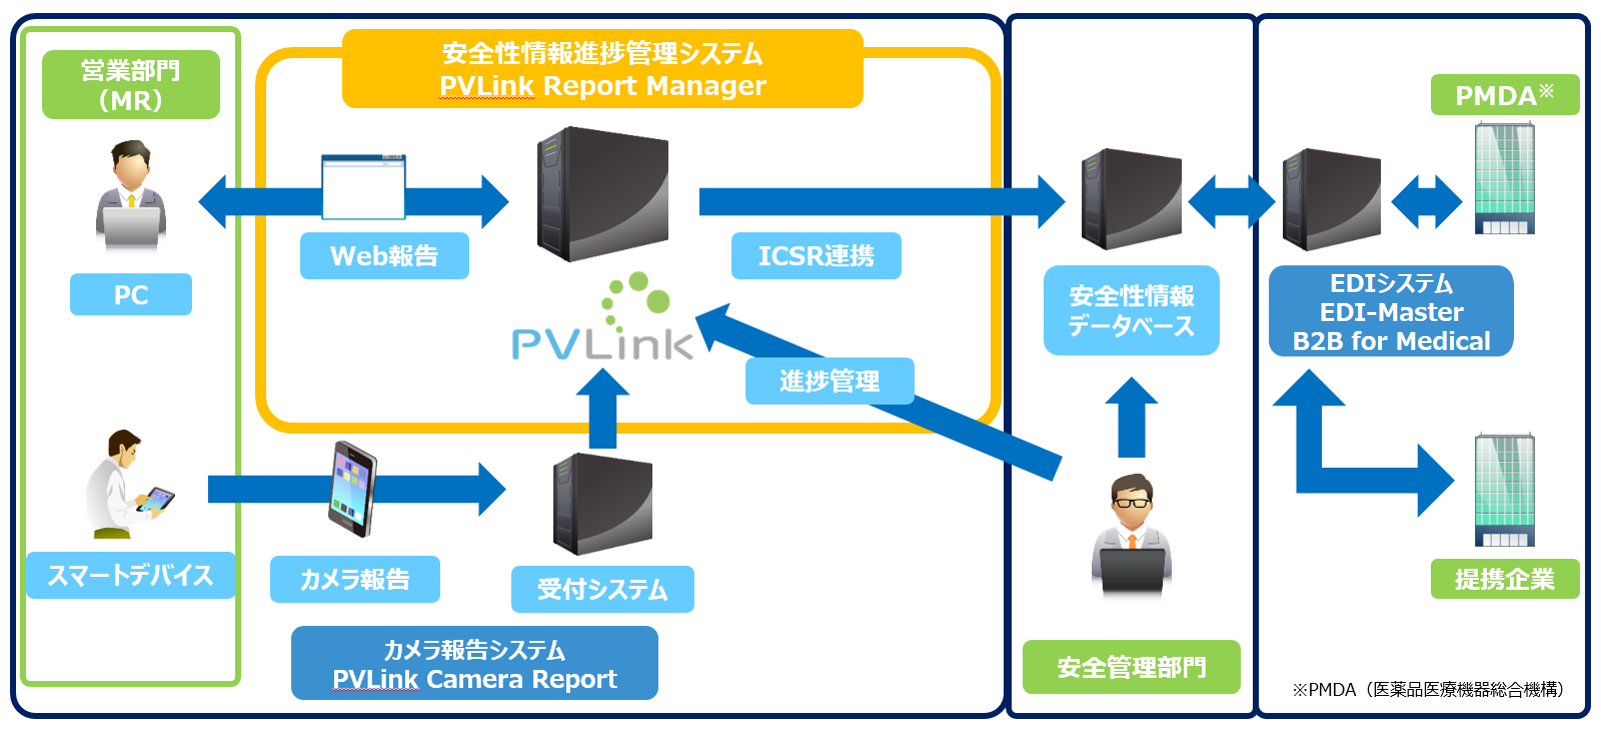 PVLink Report Manager概要図